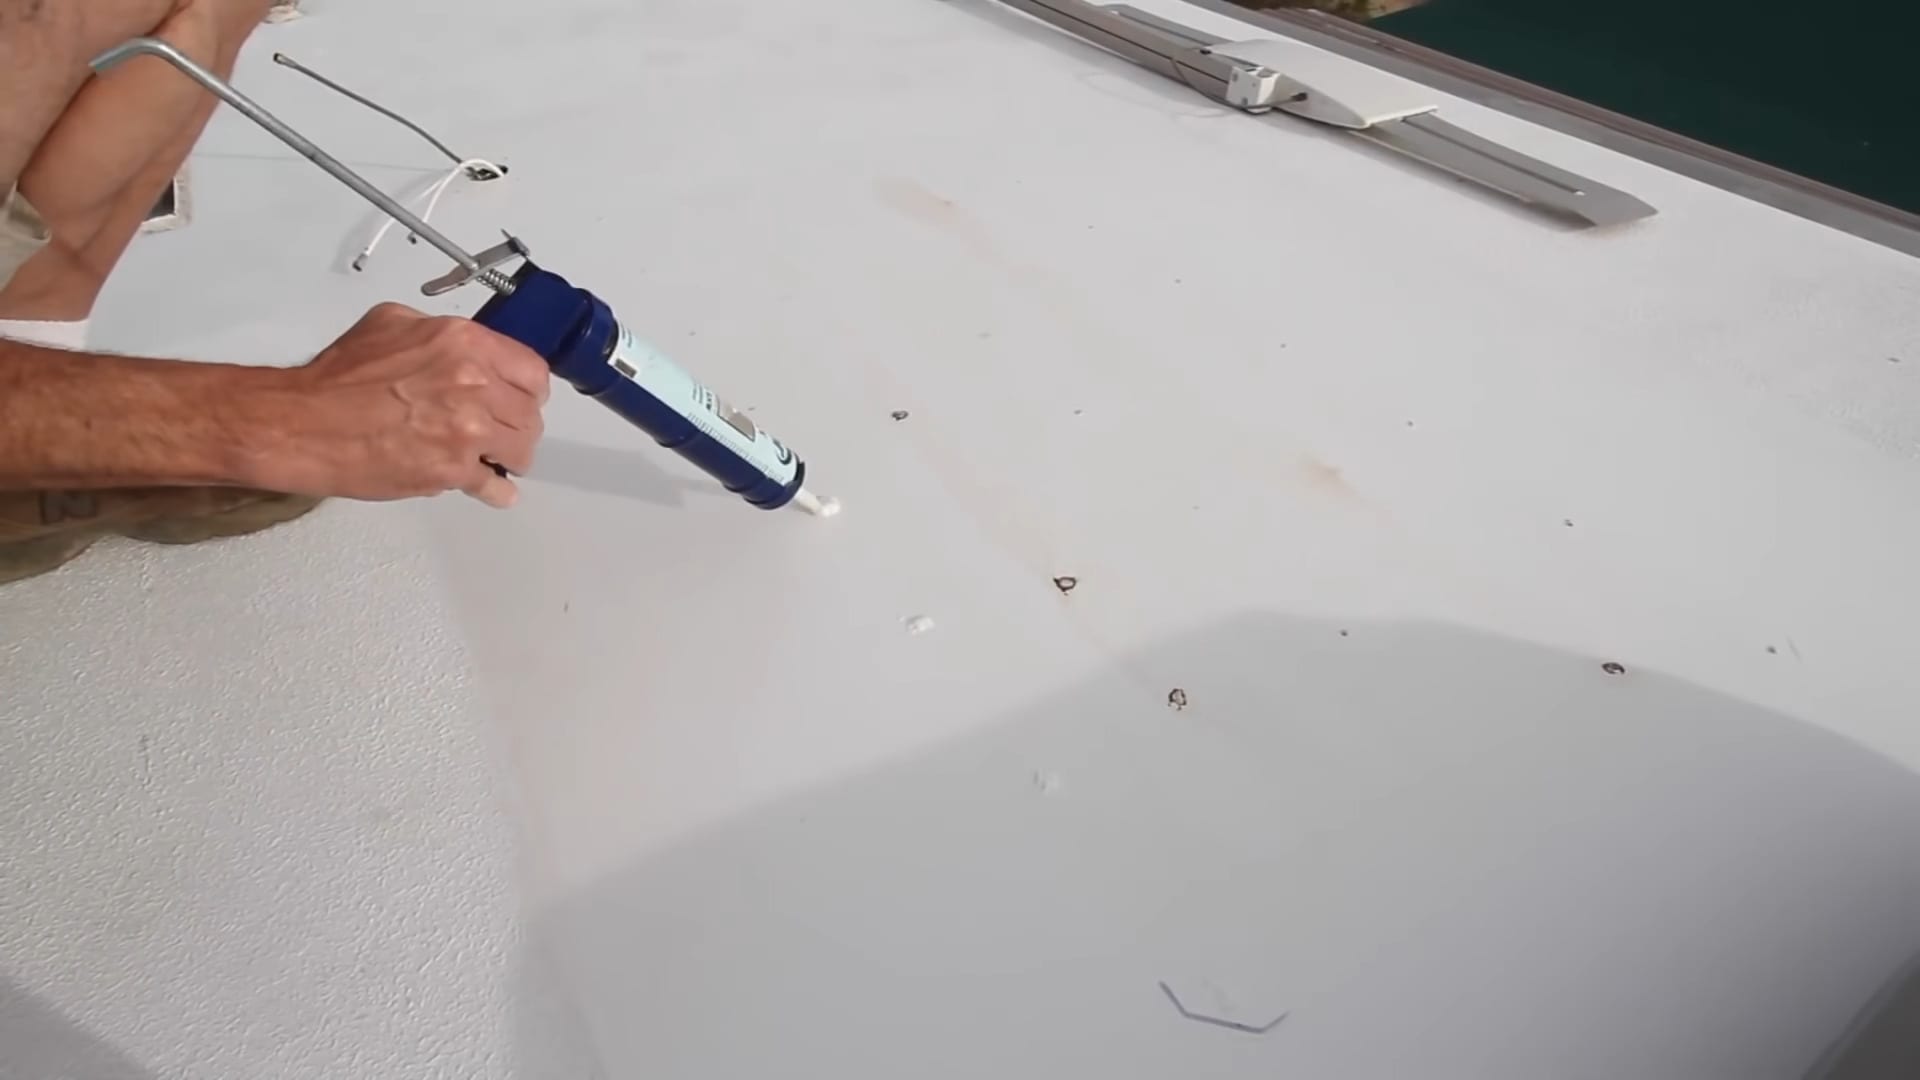 Repairing holes in an RV roof prior to using RV roof coating